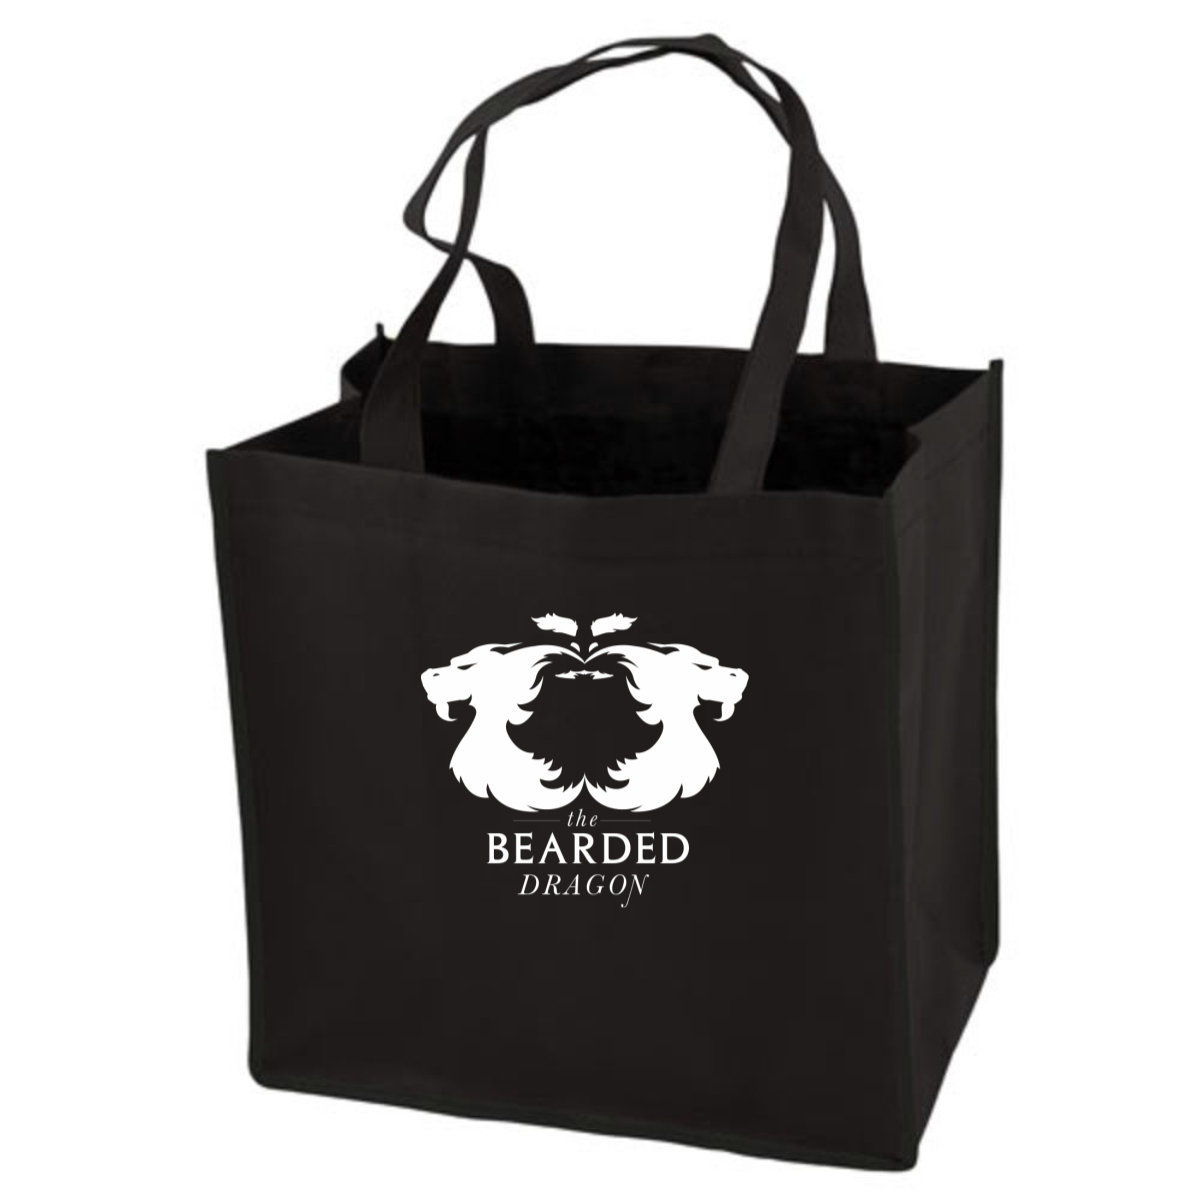 Bearded Dragon Grocery Tote